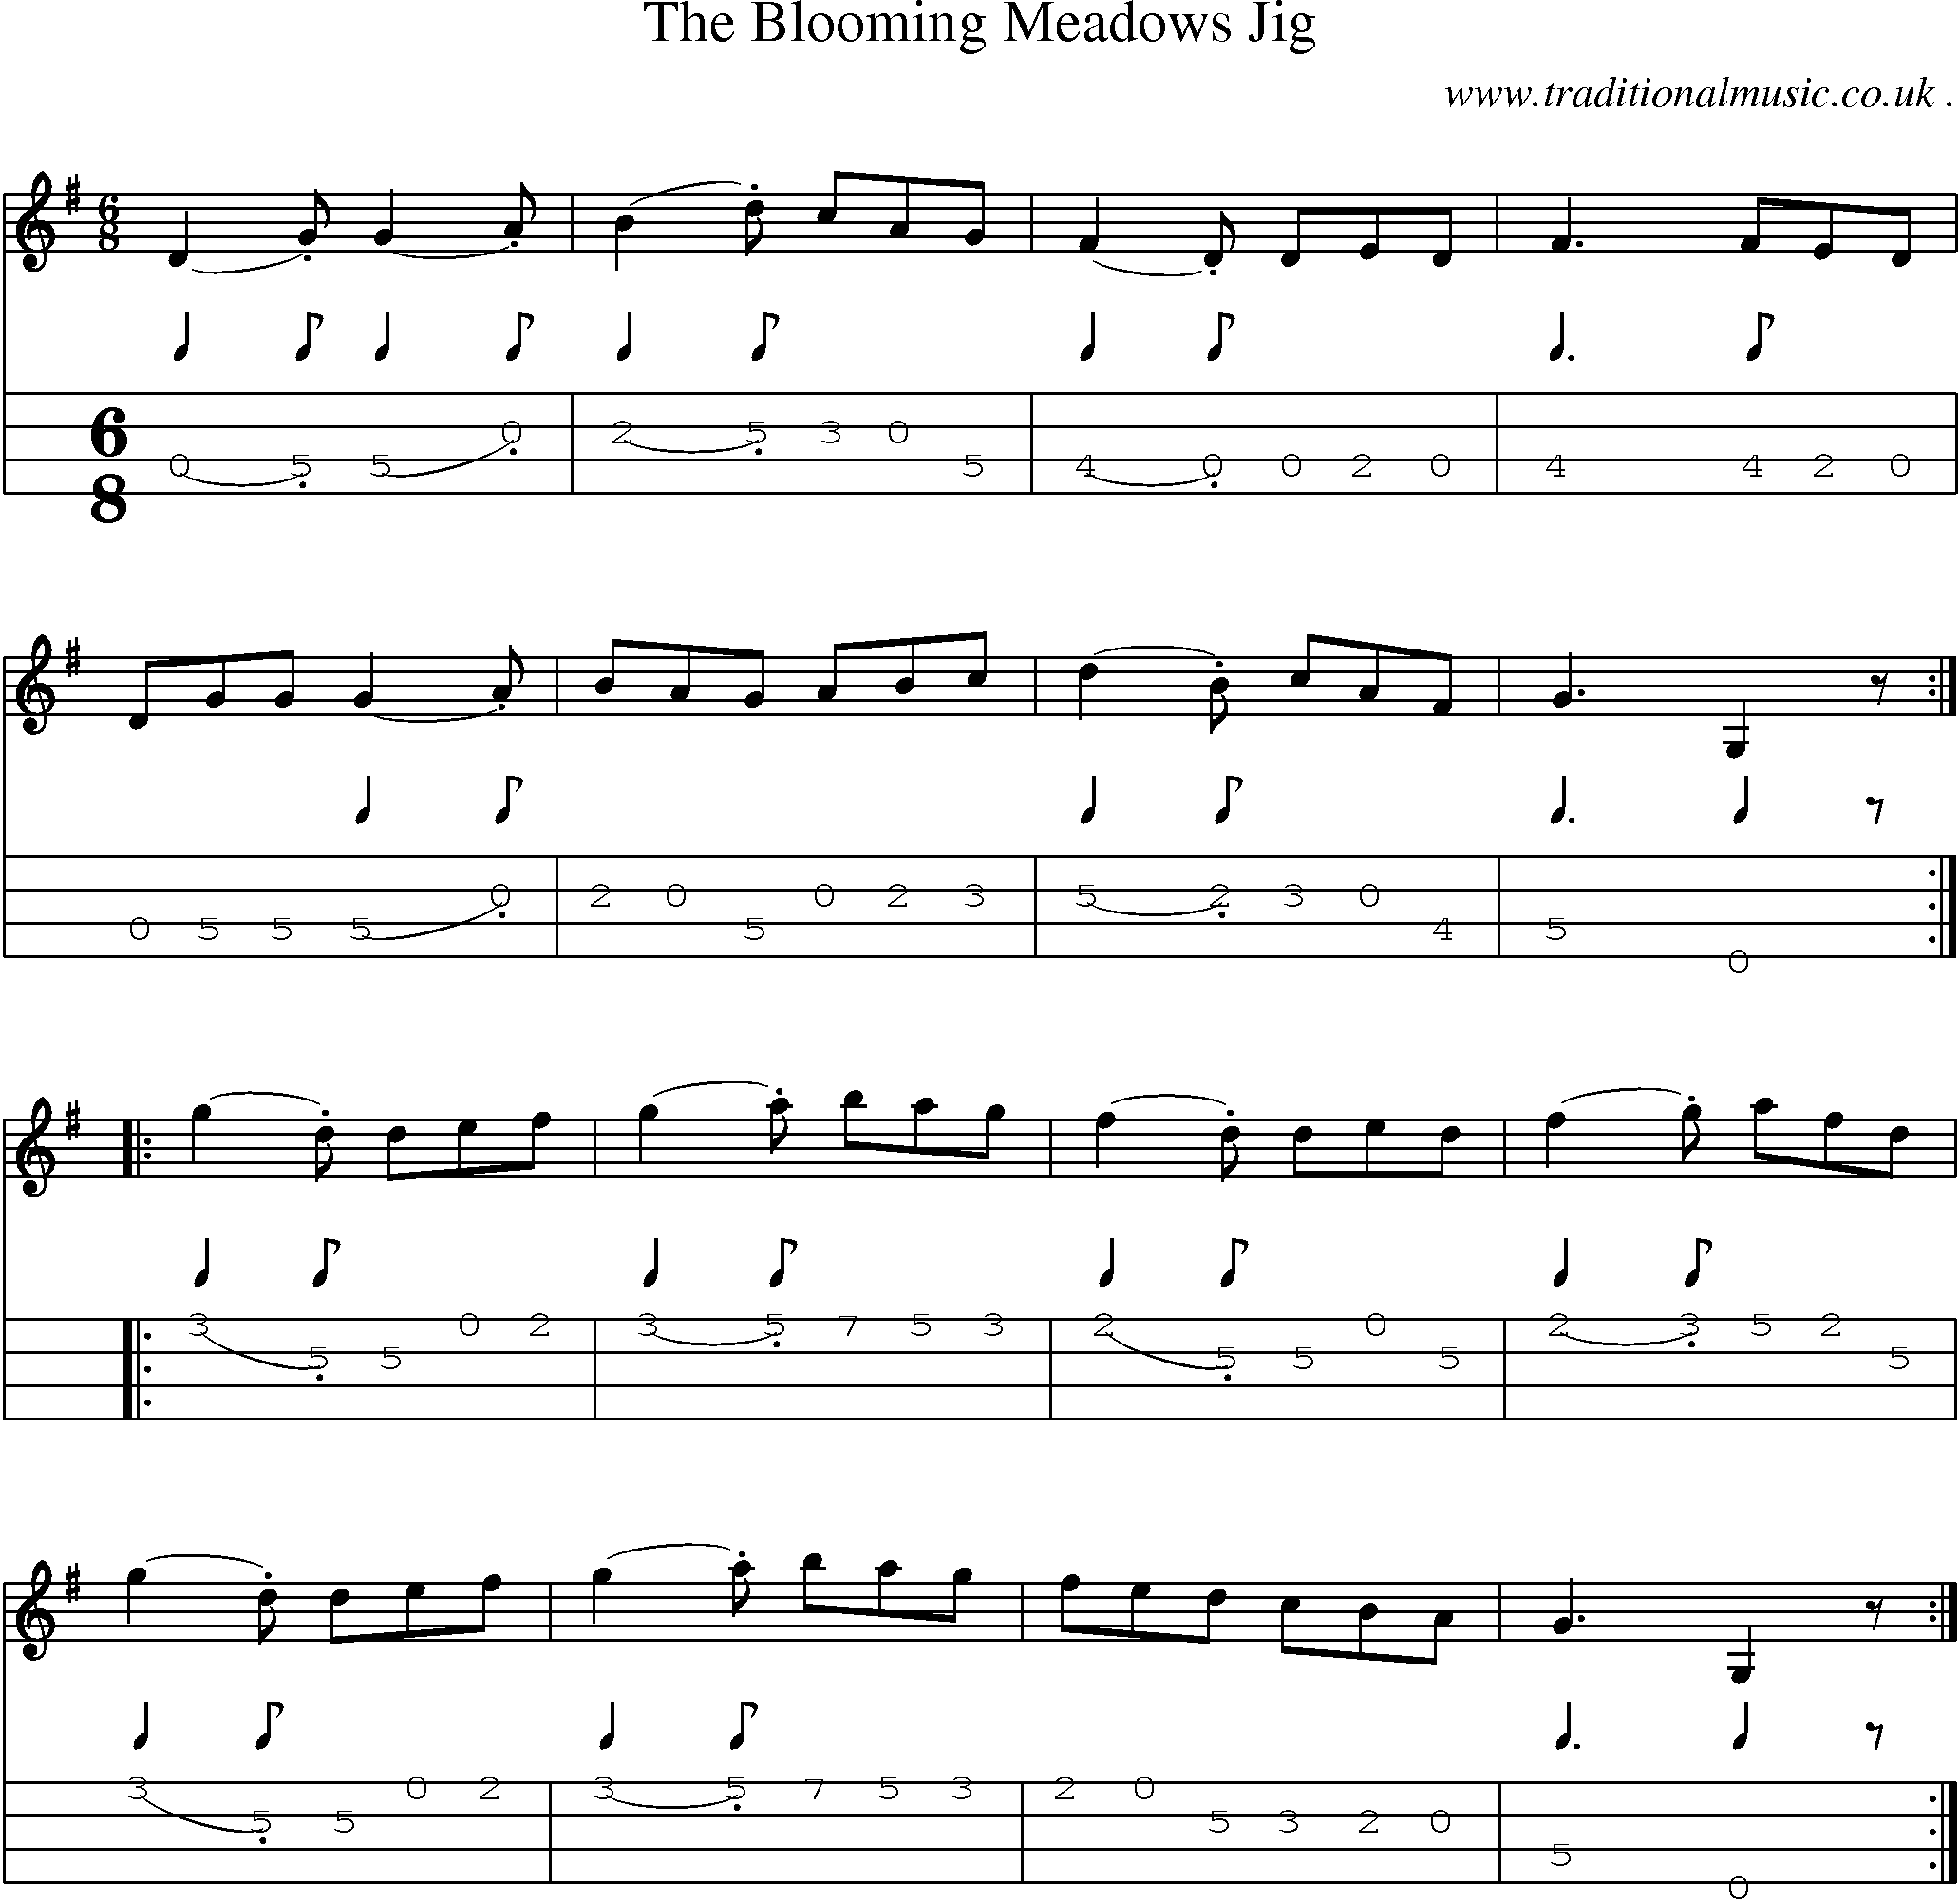 Sheet-Music and Mandolin Tabs for The Blooming Meadows Jig